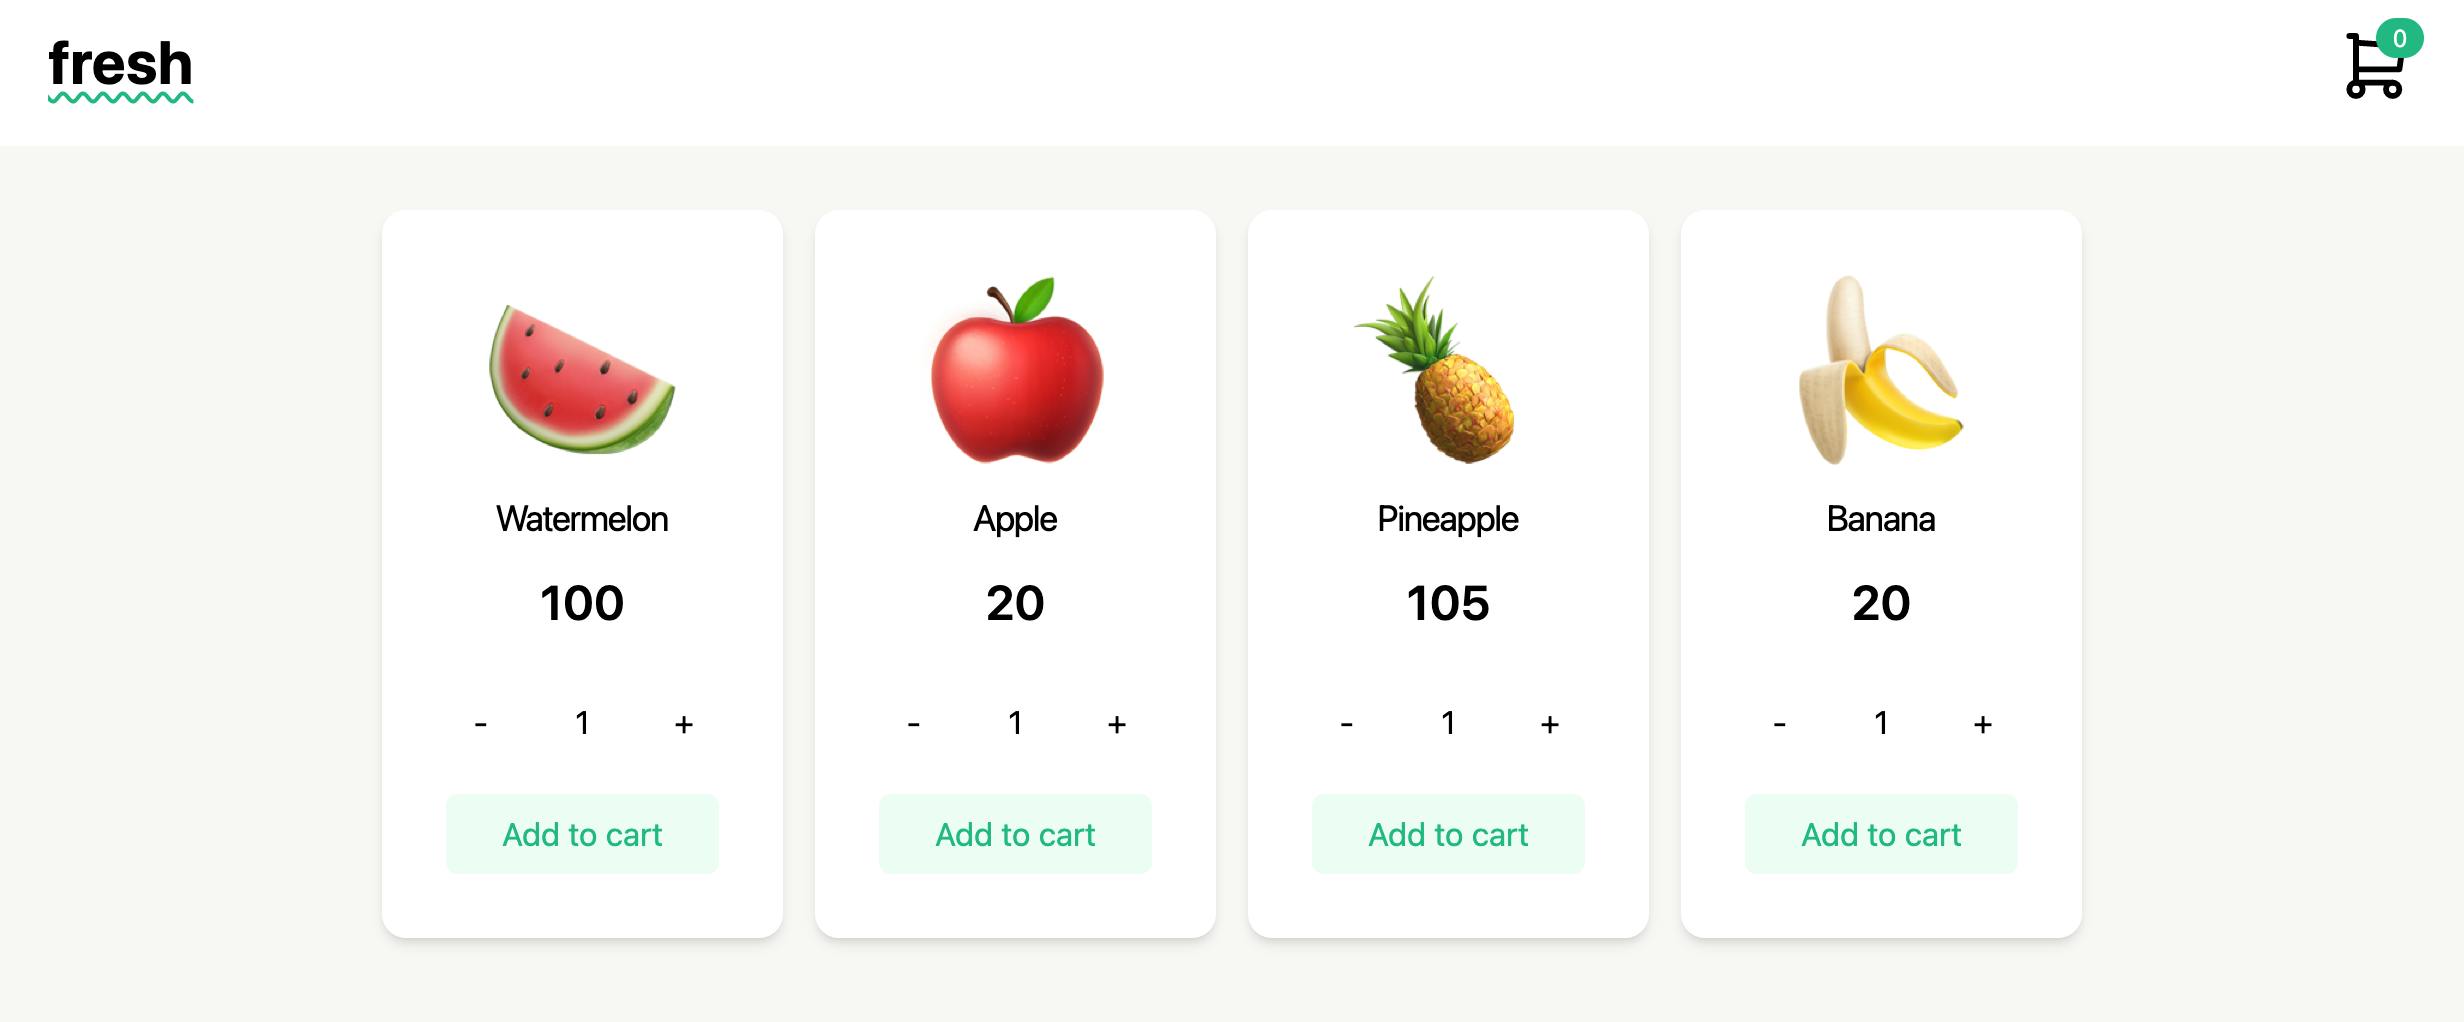 A screenshot of our fruit shop. The product price's are slightly incorrect: Watermelon (100), Apple (20), Pineapple (105) and Banana (20) instead of correctly displaying with a currency symbol.